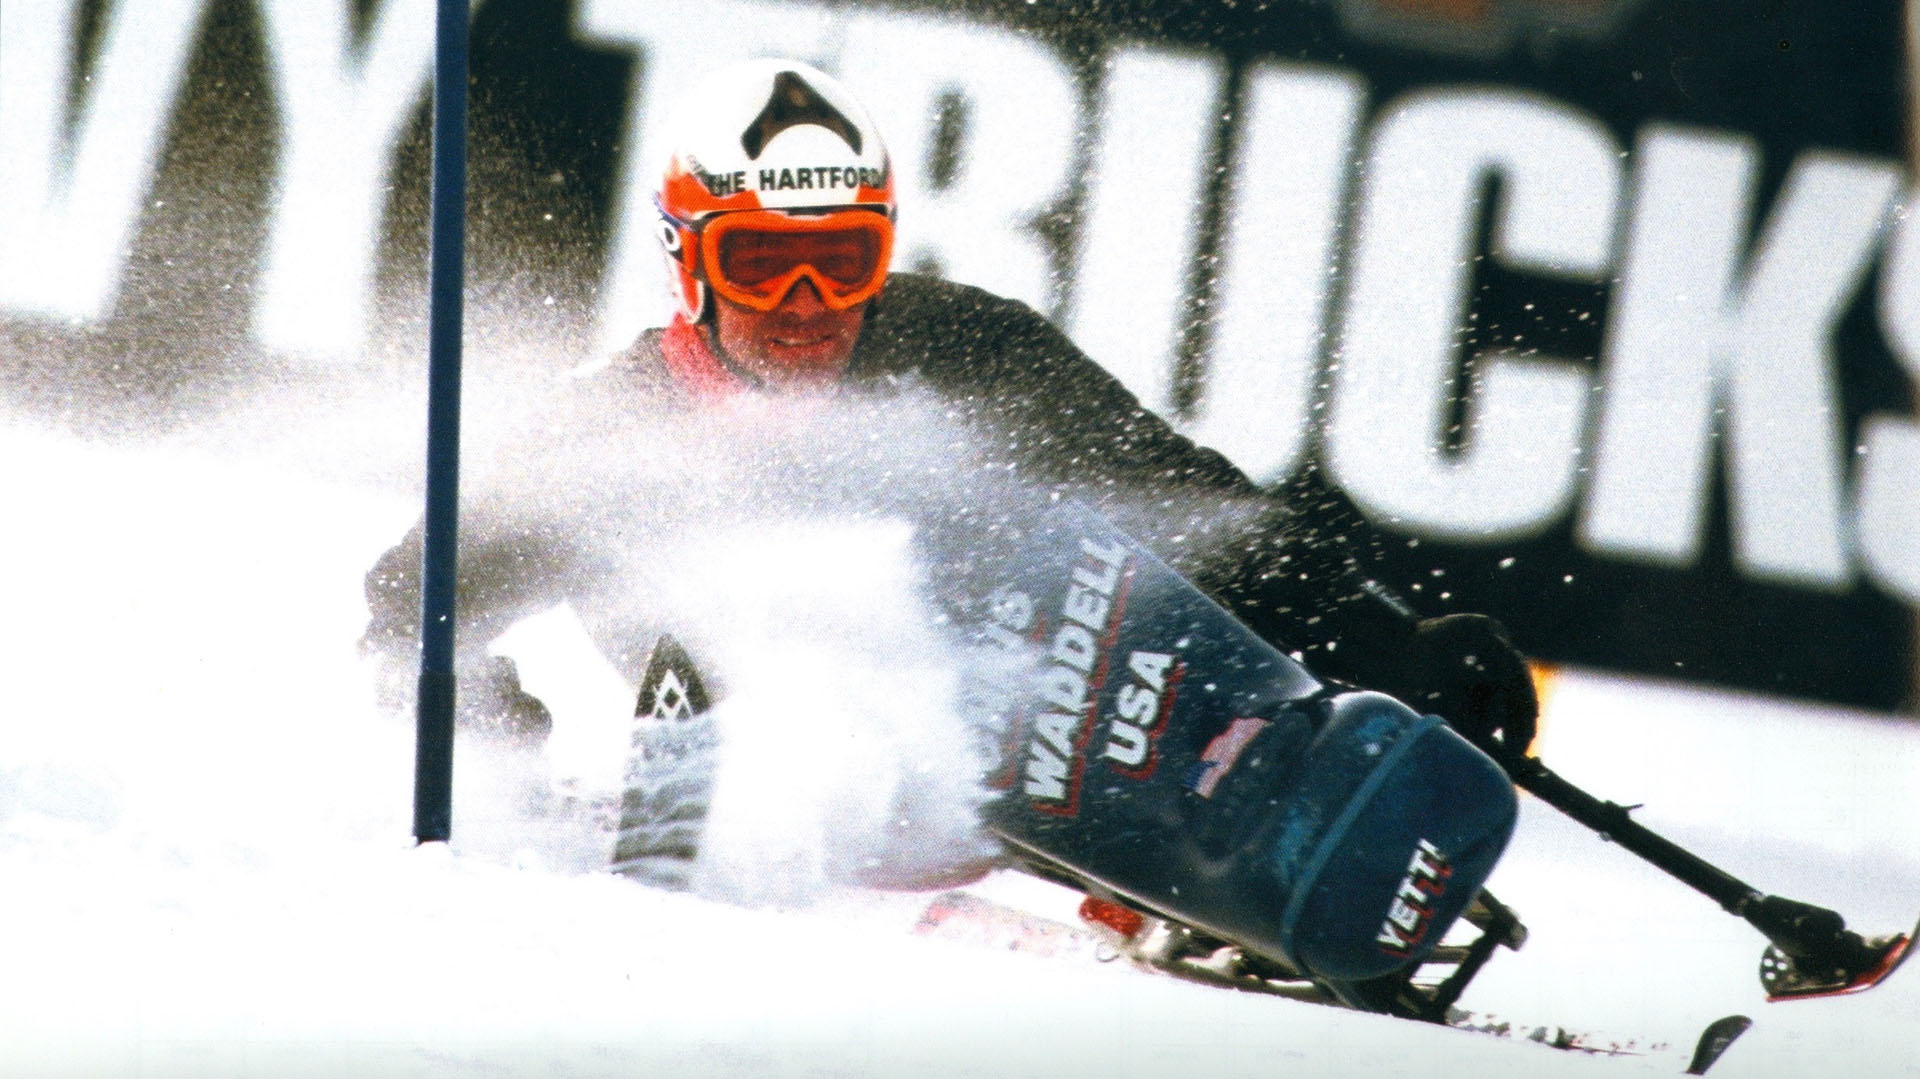 Chris Waddell on course during his ski racing days (Waddell)